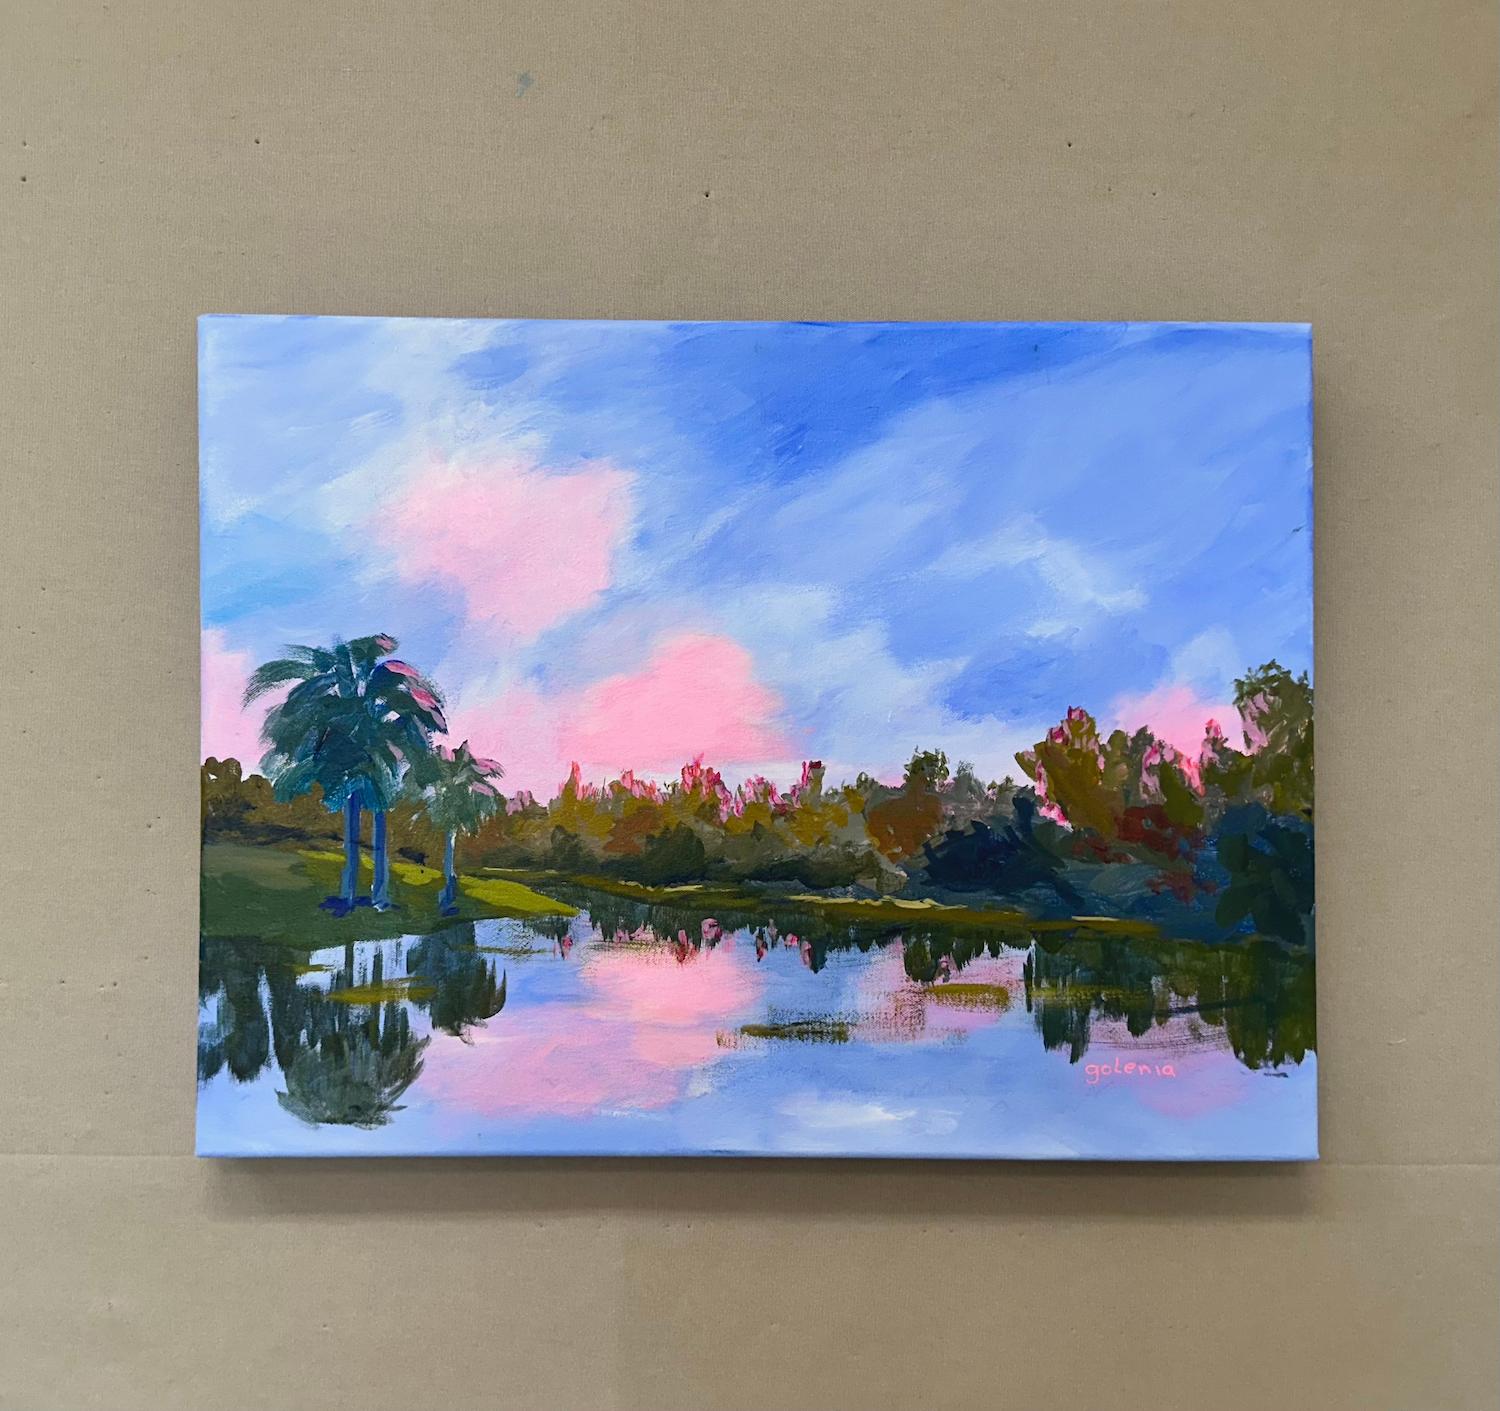 <p>Artist Comments<br>The rising sun hides behind the trees, casting their crowns in a soft red glow. Cotton candy clouds drift across the sky, their reflections dancing on the tranquil lake. This ethereal view will only last for a while, as every